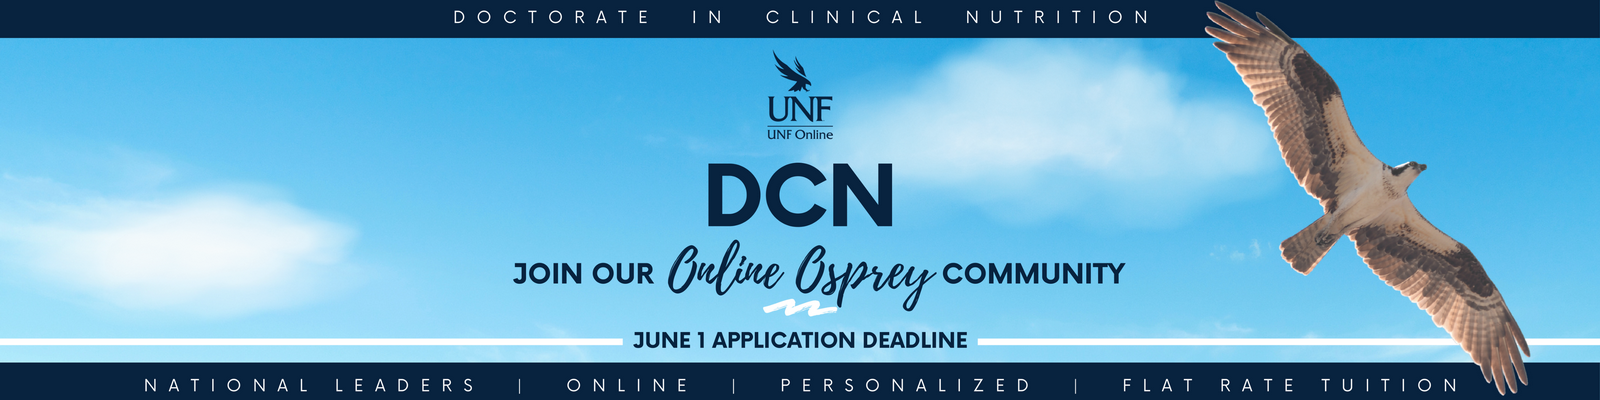 UNF Online DCN Join our Online Osprey Community. June 1 App deadline. National Leaders, online, personalized, flat rate tuition